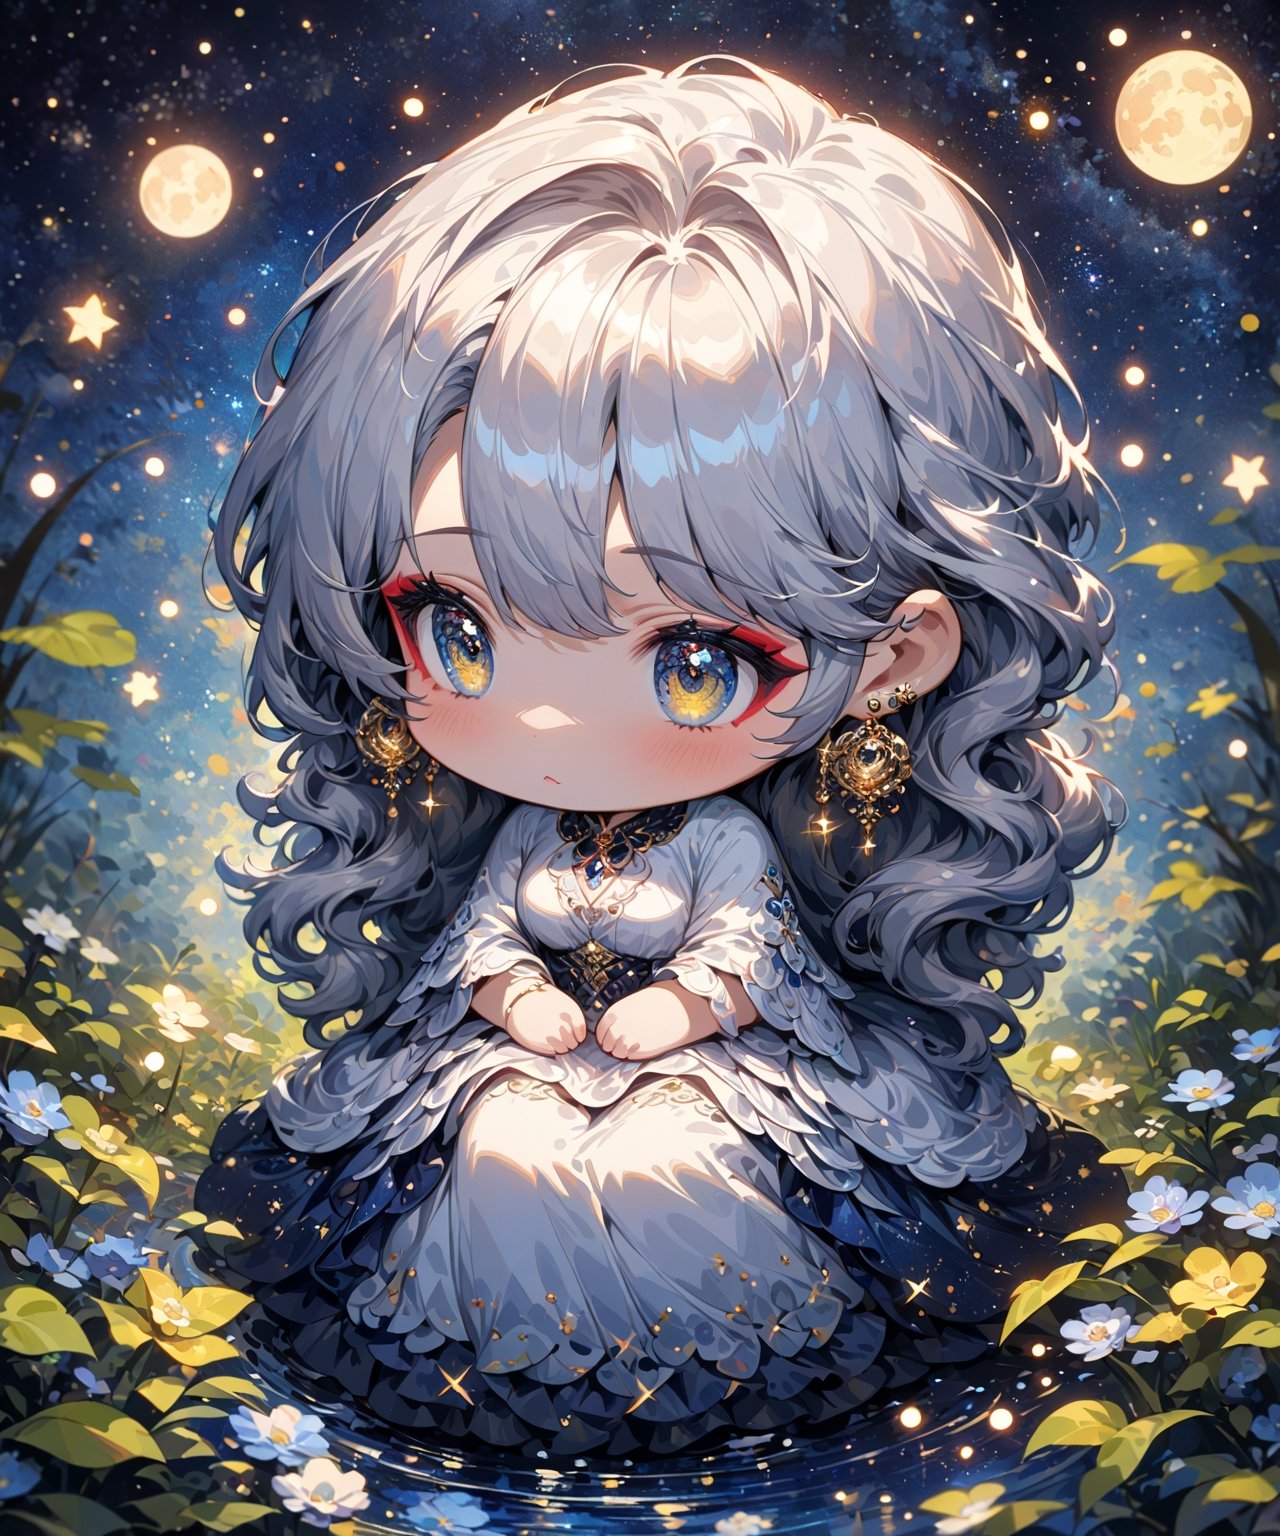 Masterpiece, 4K, ultra detailed, ((solo)), ((chibi)), anime impressionism art style, elegant mature woman with beautiful detailed eyes and glamorous makeup, long flowy gray hair, finely detailed earrings, hands resting on laps, sitting in a flowering forest,  swirling starry night, more detail XL, SFW, depth of field,